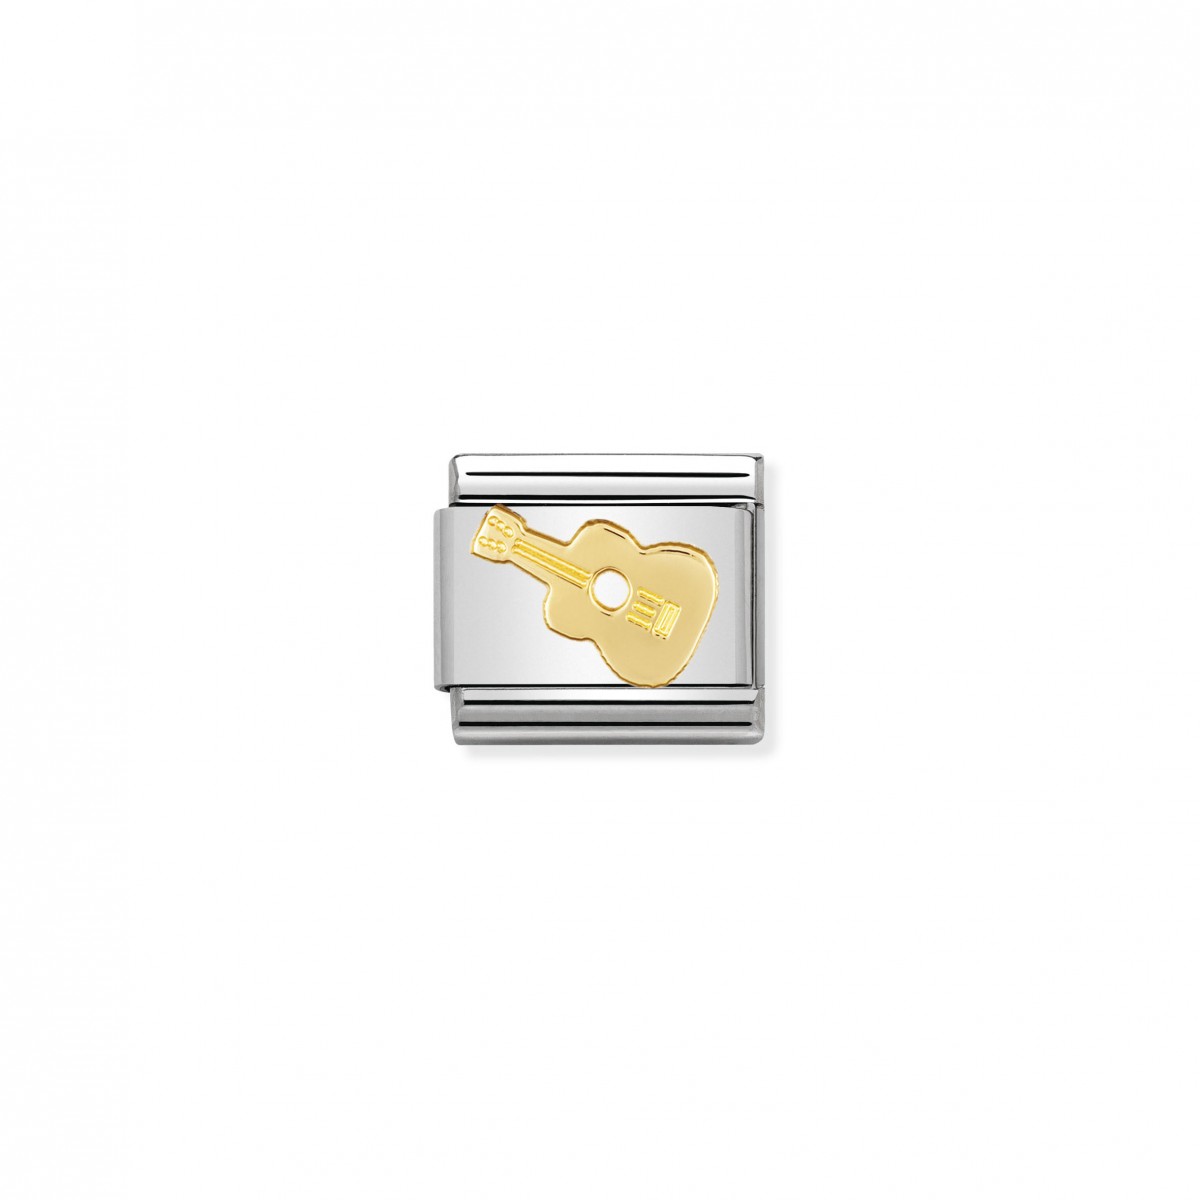 Nomination Classic Gold Music Guitar Charm 030117_03